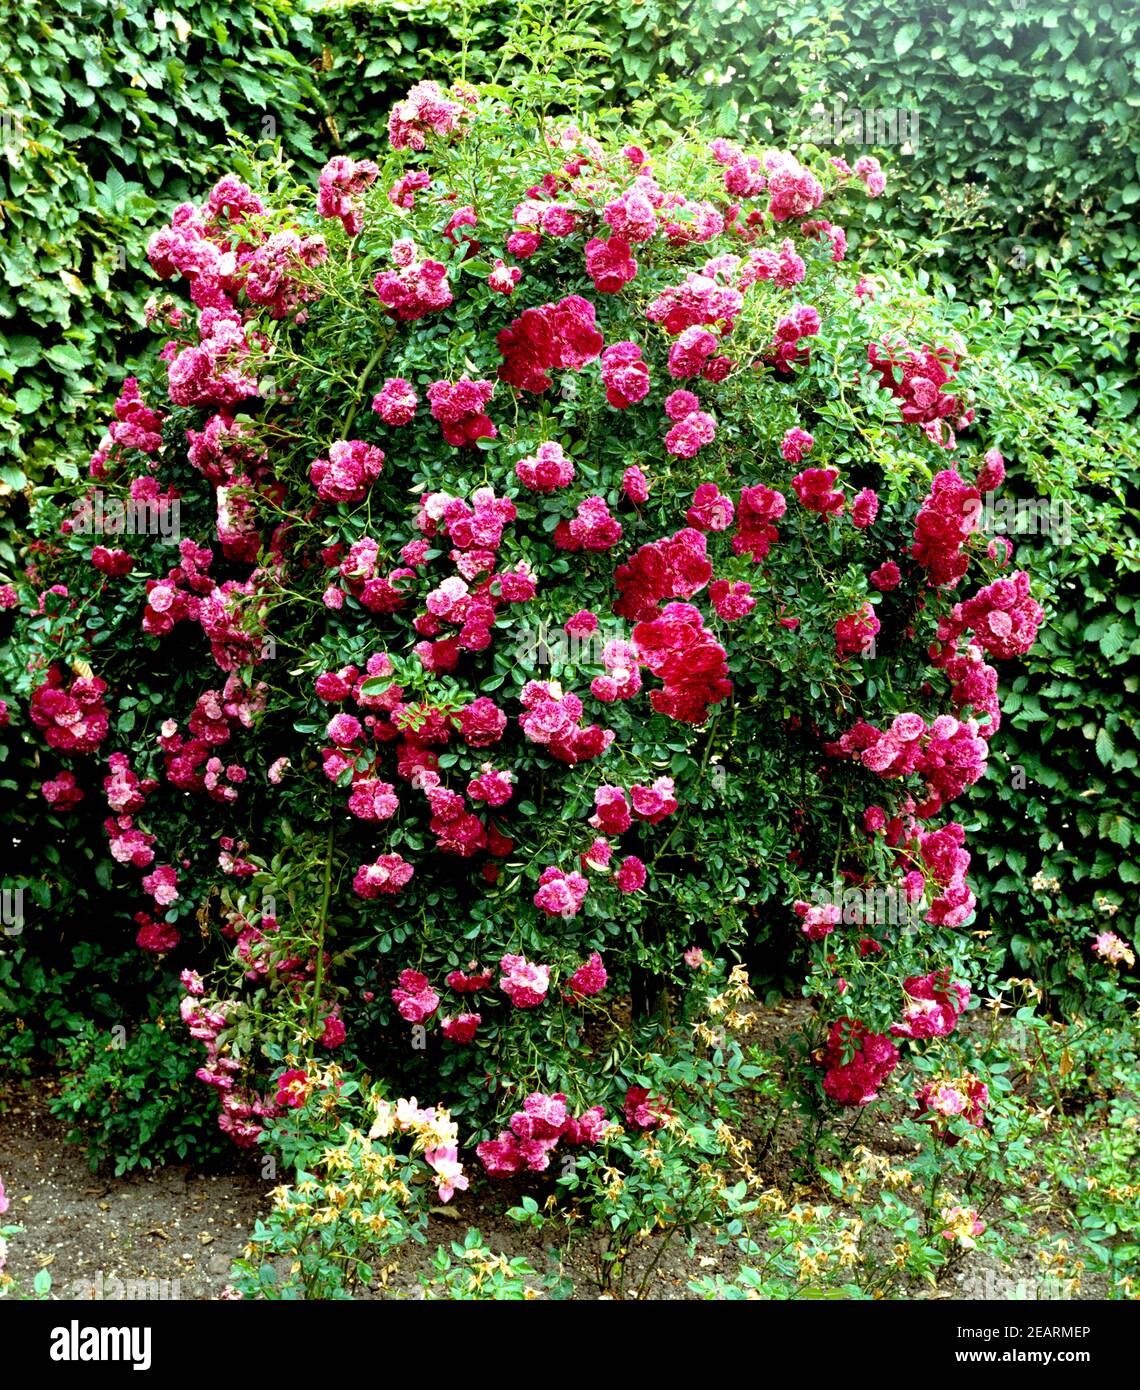 Trauerrose, Excelsa Stock Photo